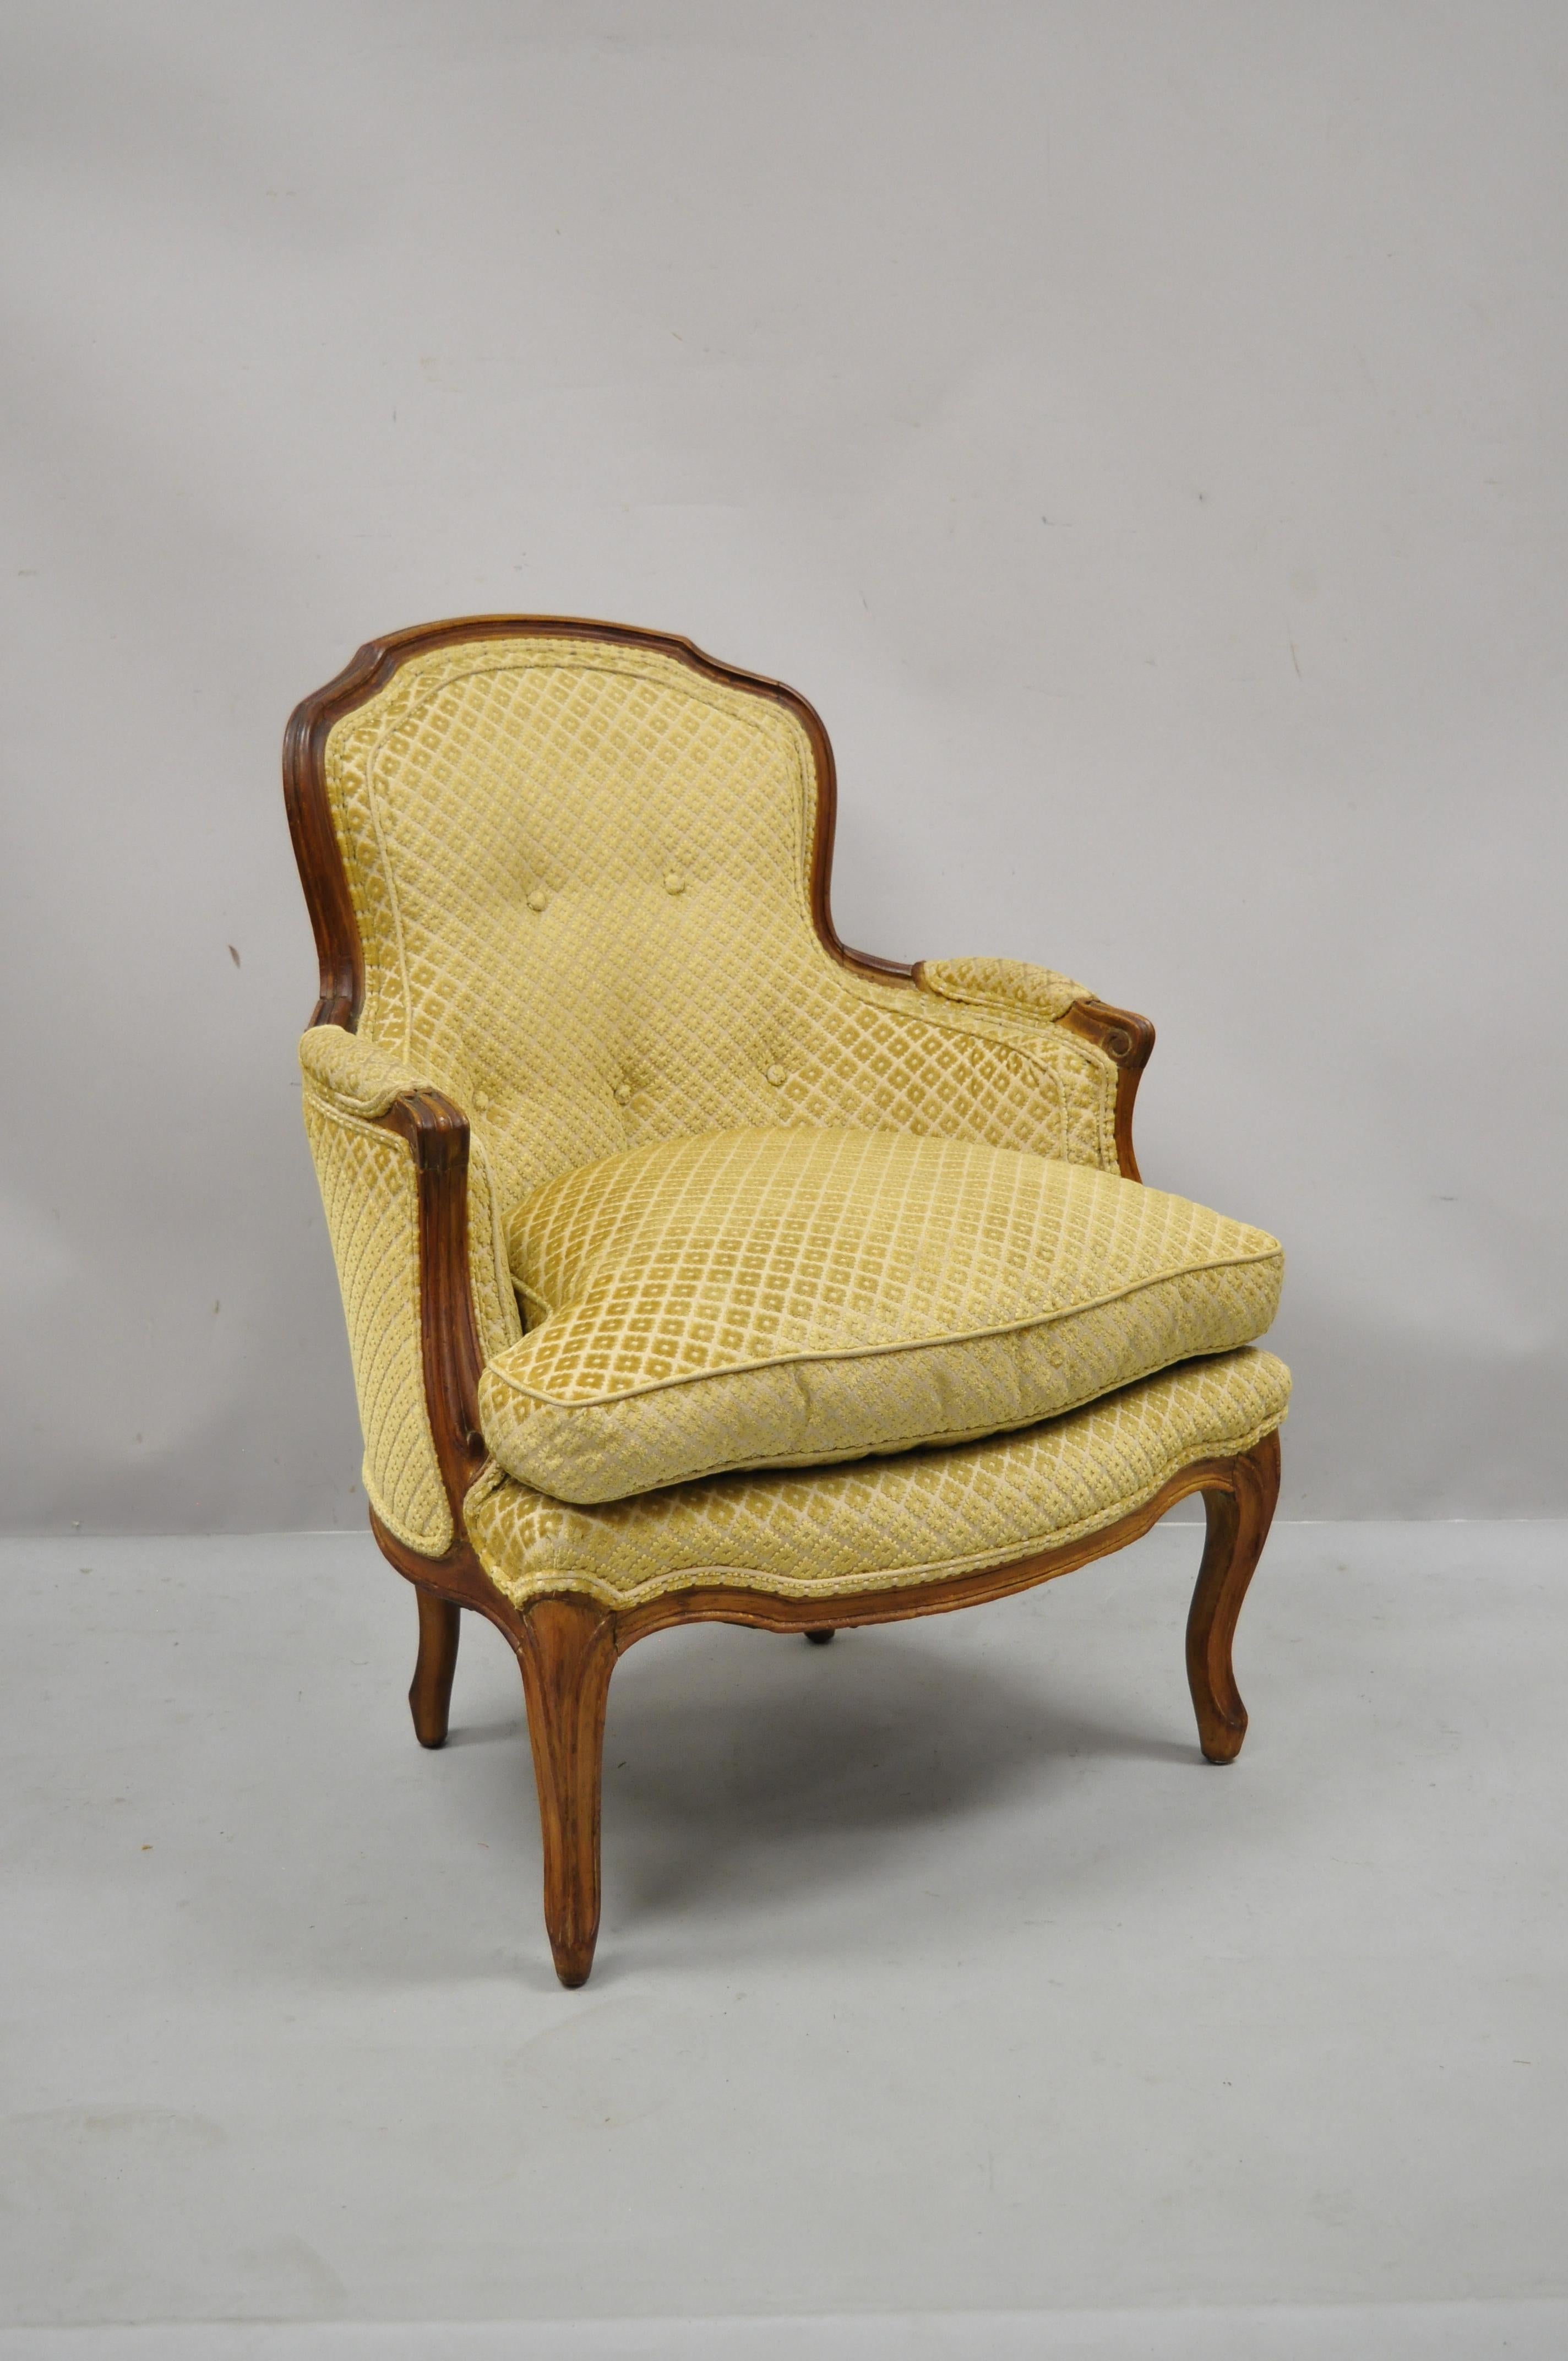 Vintage French Provincial Louis XV style small bergere walnut lounge arm chair. Item features nice smaller size, down filled cushion, solid wood frame, beautiful wood grain, nicely carved details, cabriole legs, very nice antique item, quality